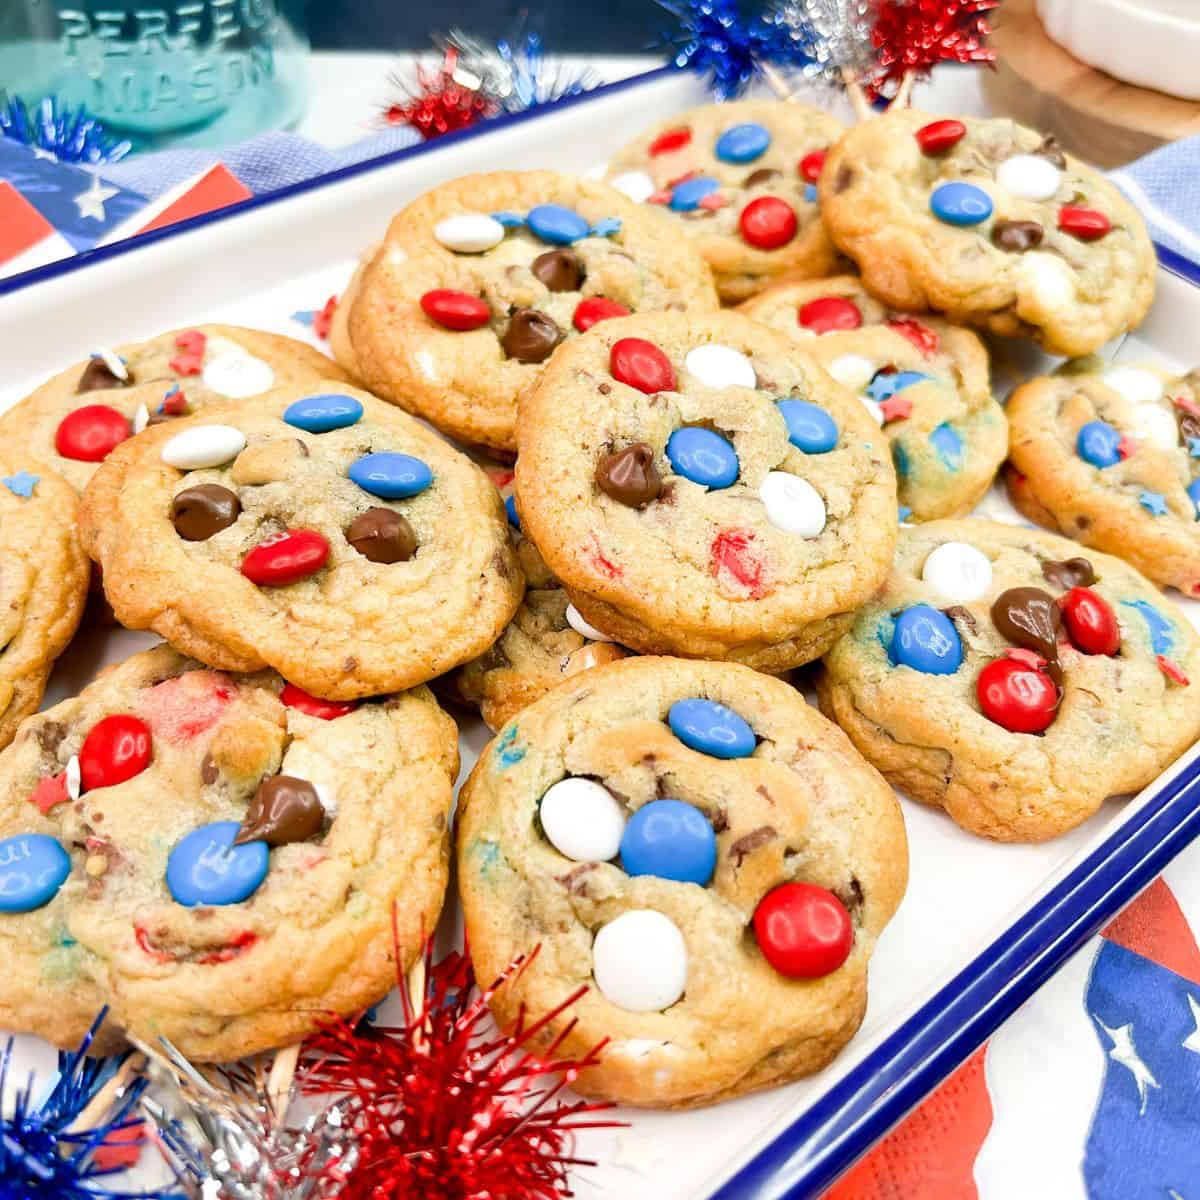 Patriotic Red, White and Blue M&M's & Chocolate Chip Cookies Recipe